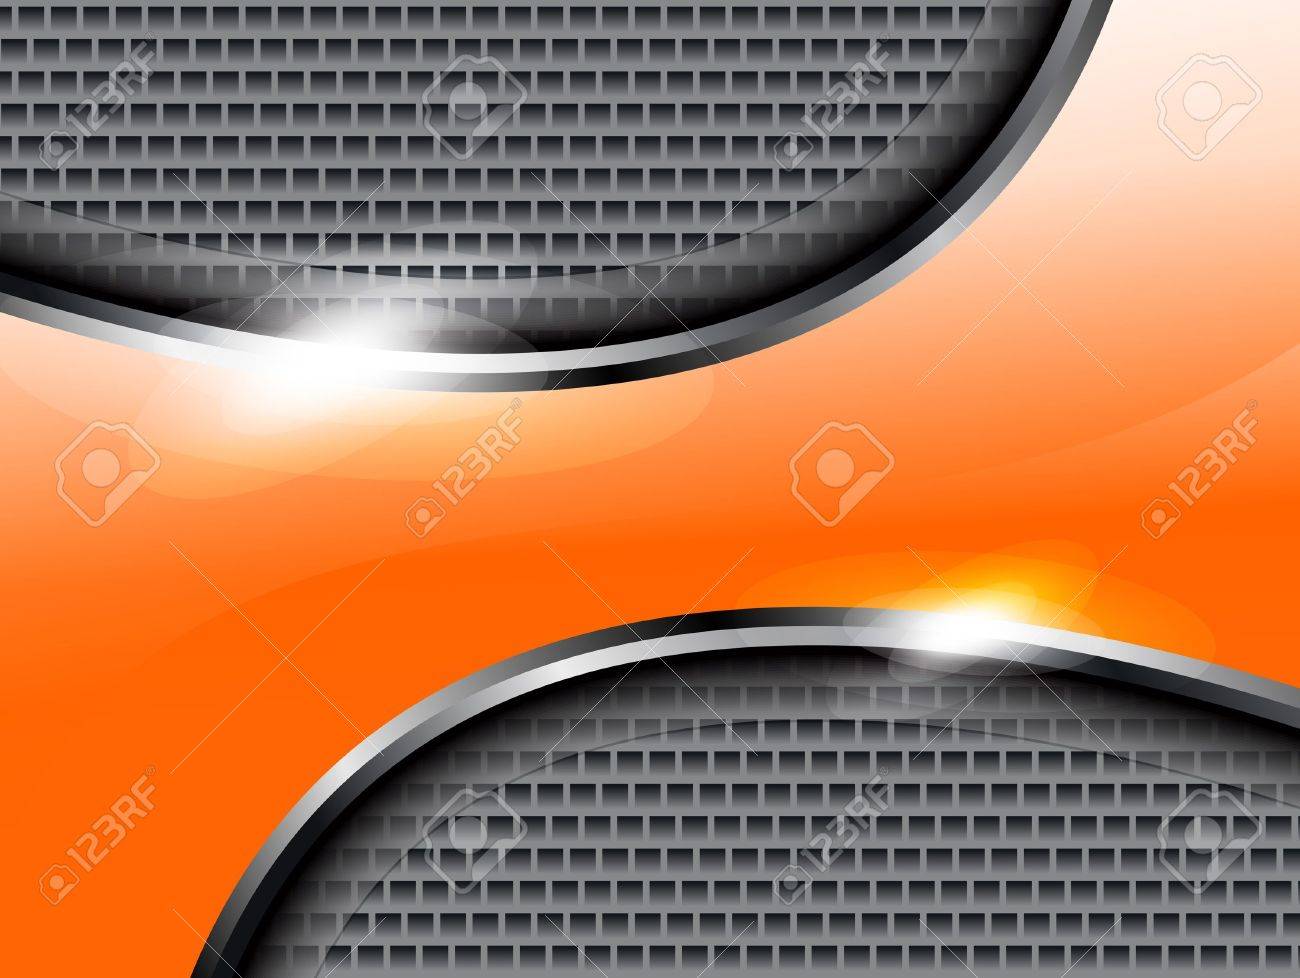 Abstract Orange Steal Background Vector Illustration Royalty